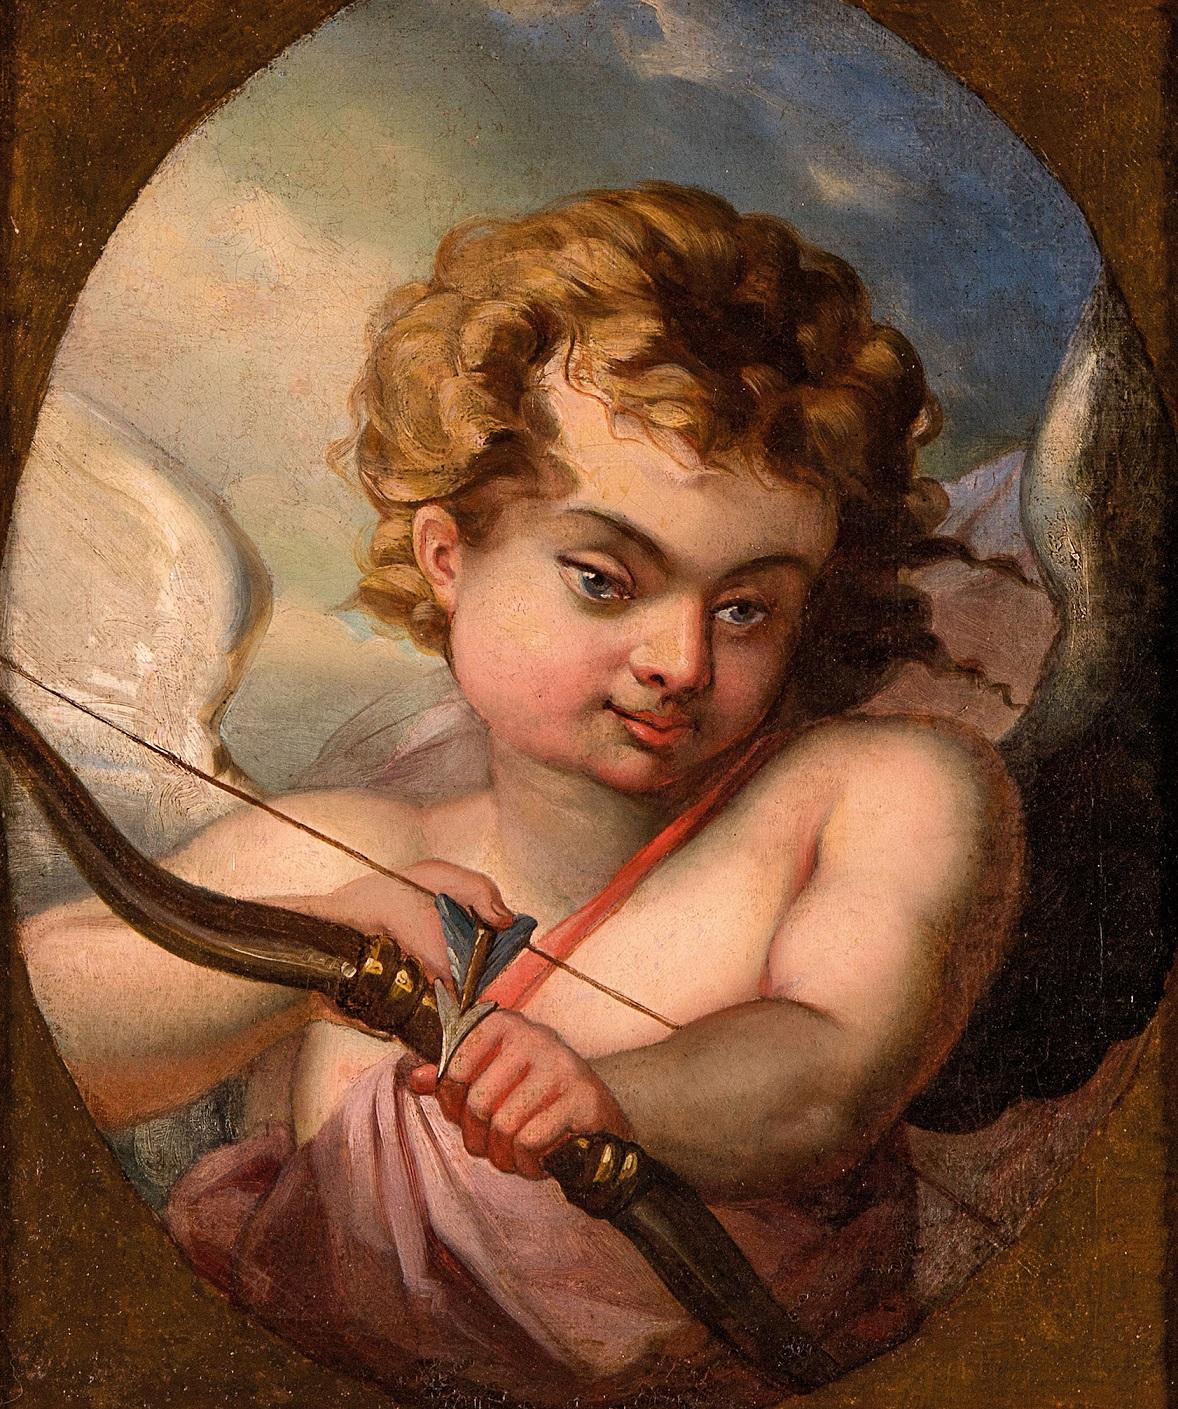 Cupid Paint Oil on canvas France Neo classicism Art Quality Love 18th century